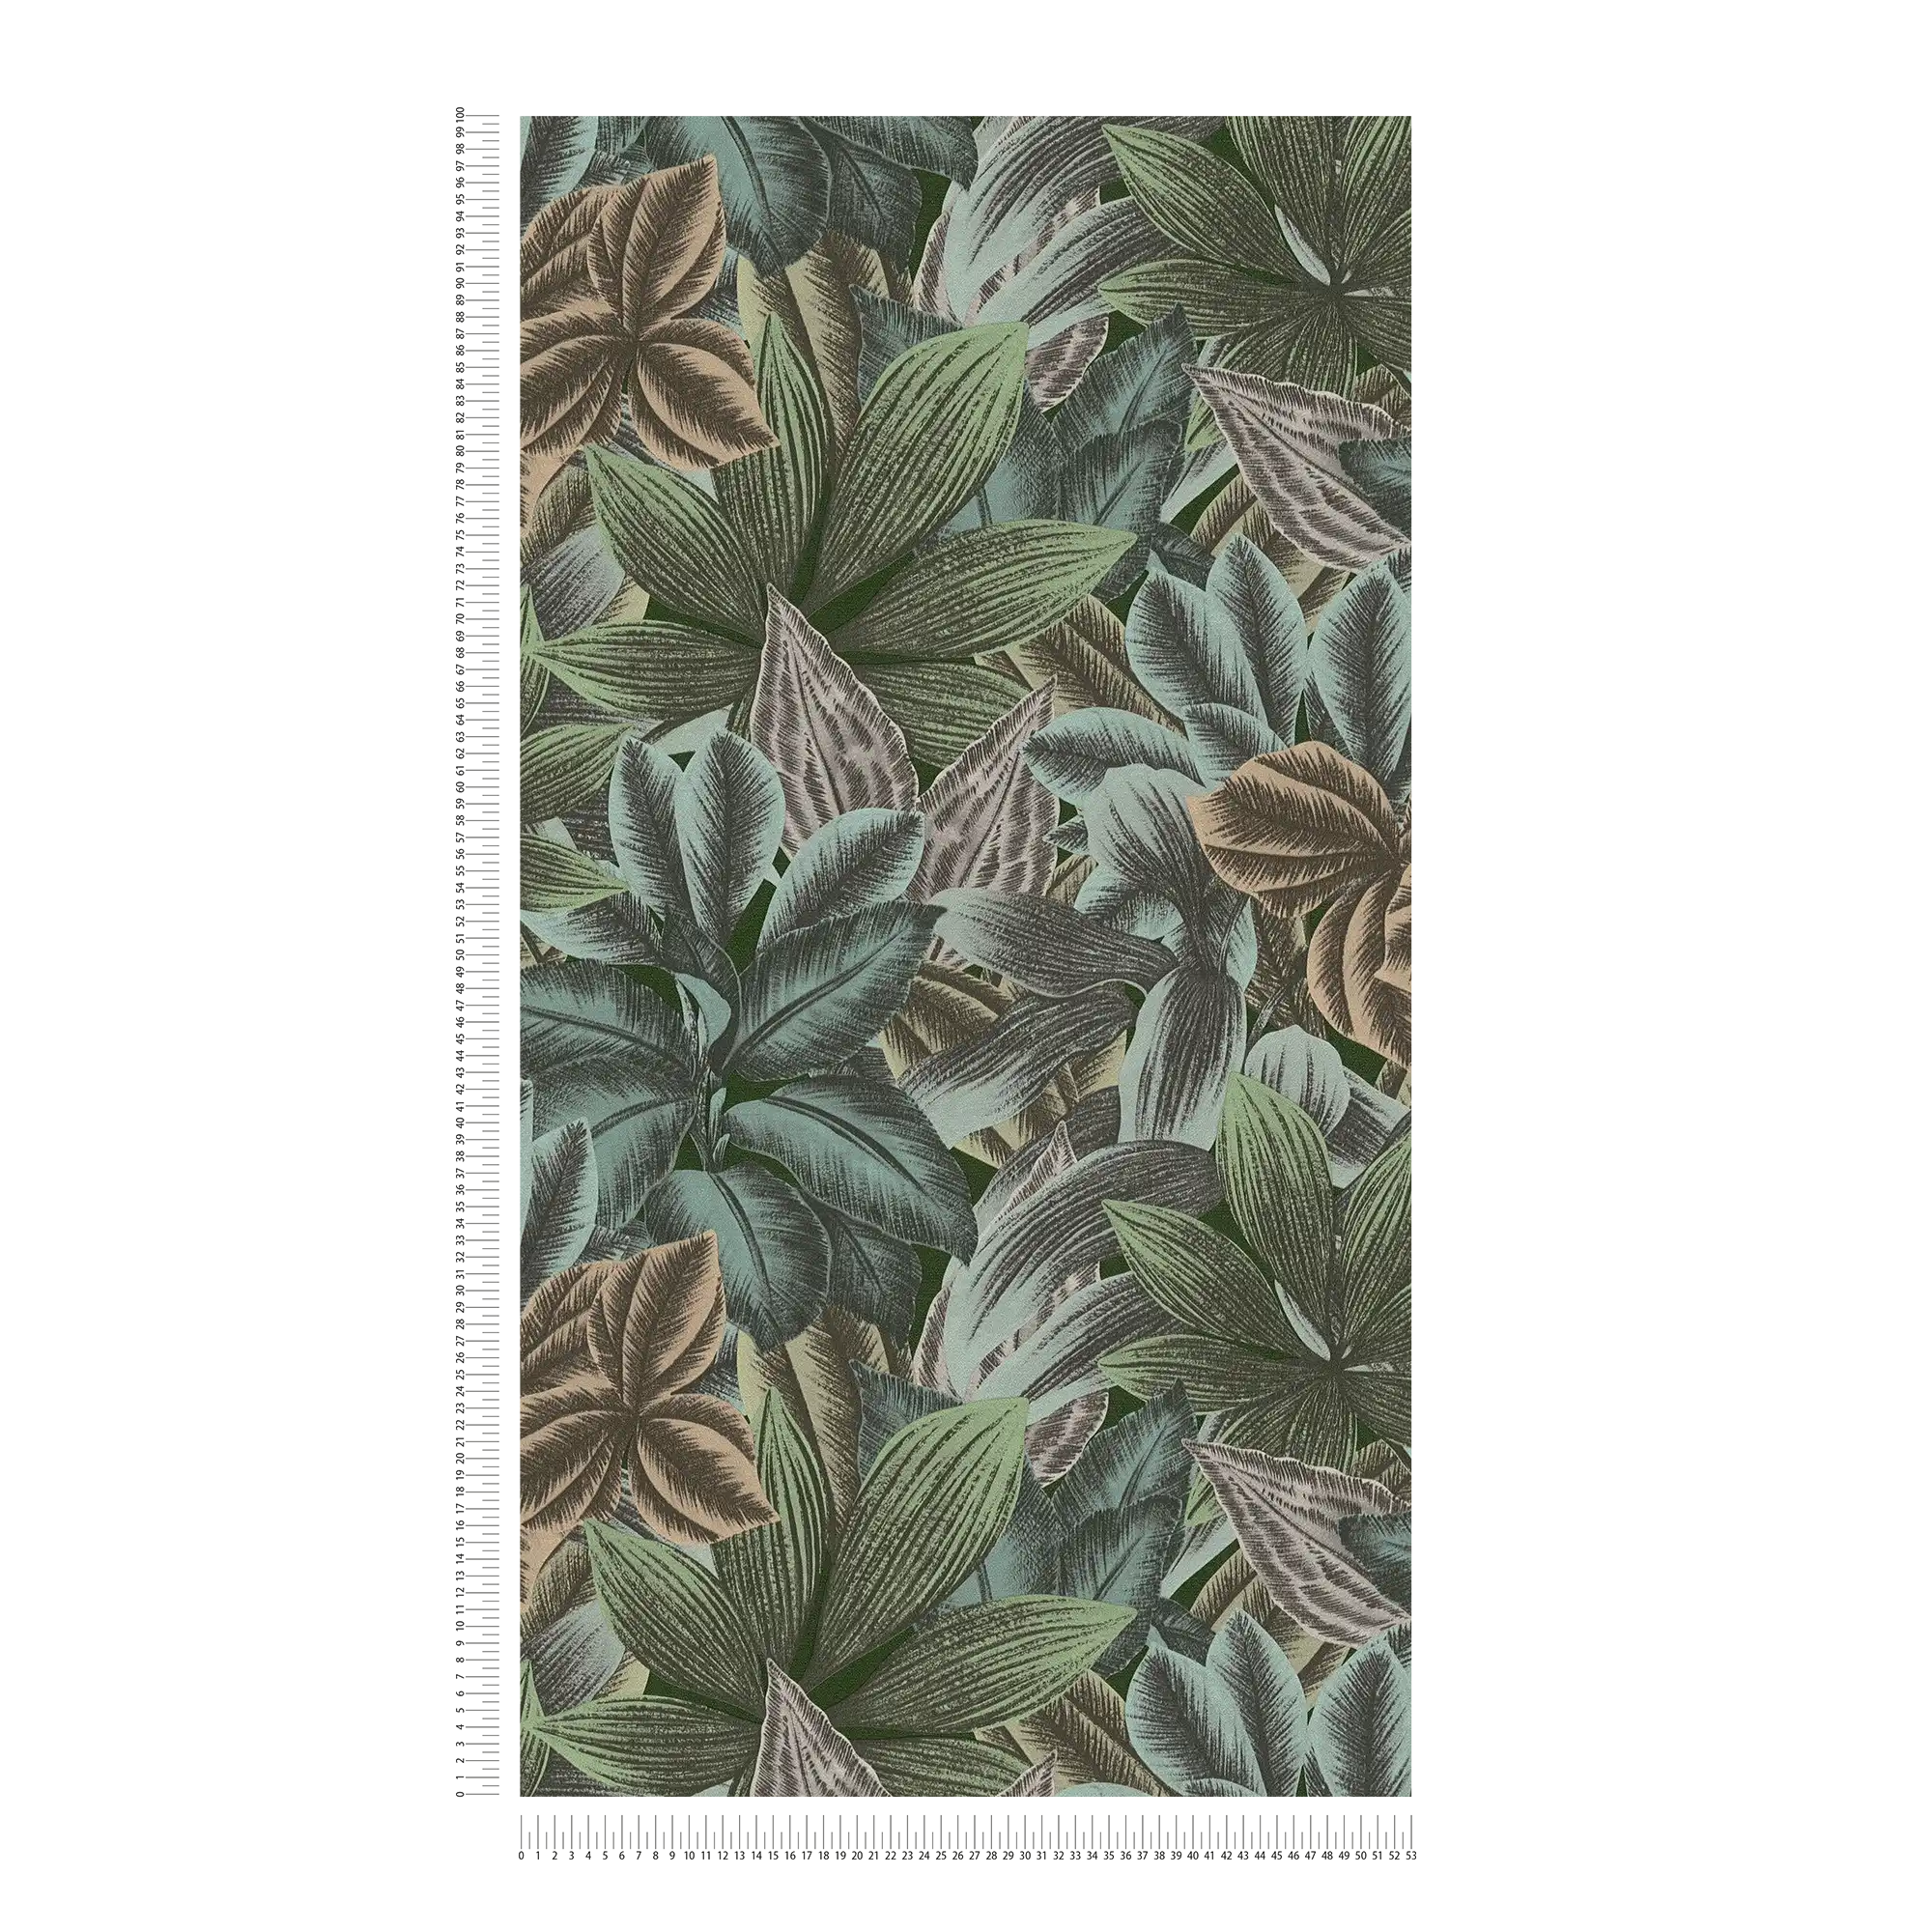             Leaf pattern wallpaper with tropical look - green, blue, grey
        